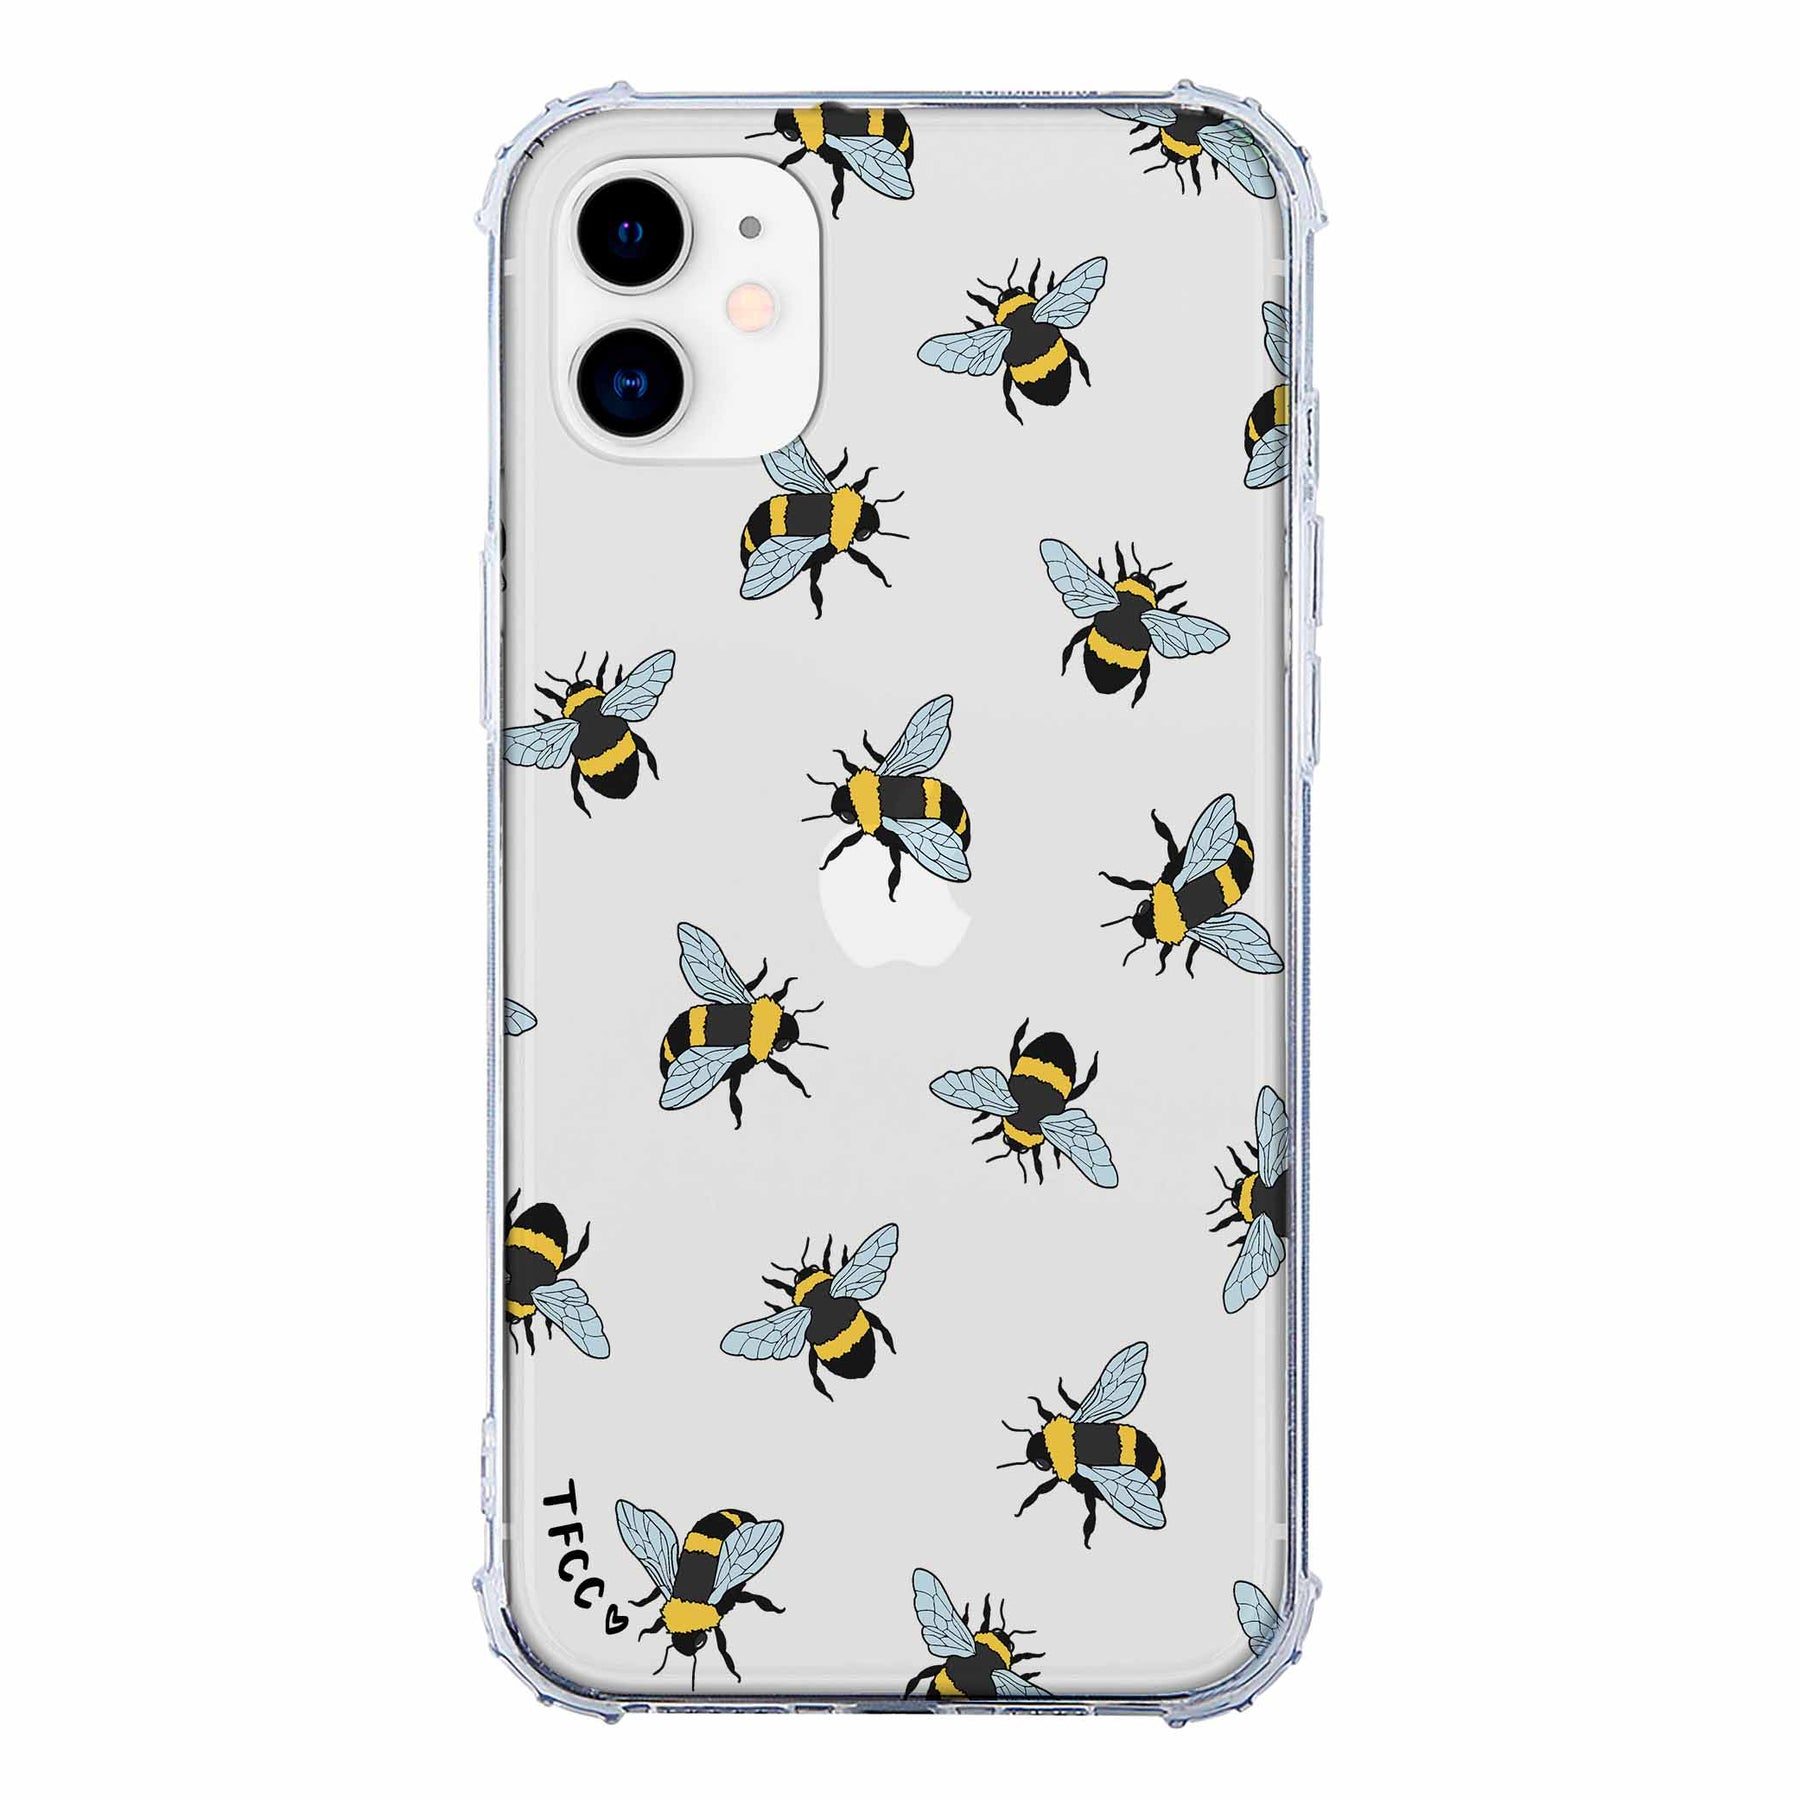 BEE CLEAR CASE - thefonecasecompany